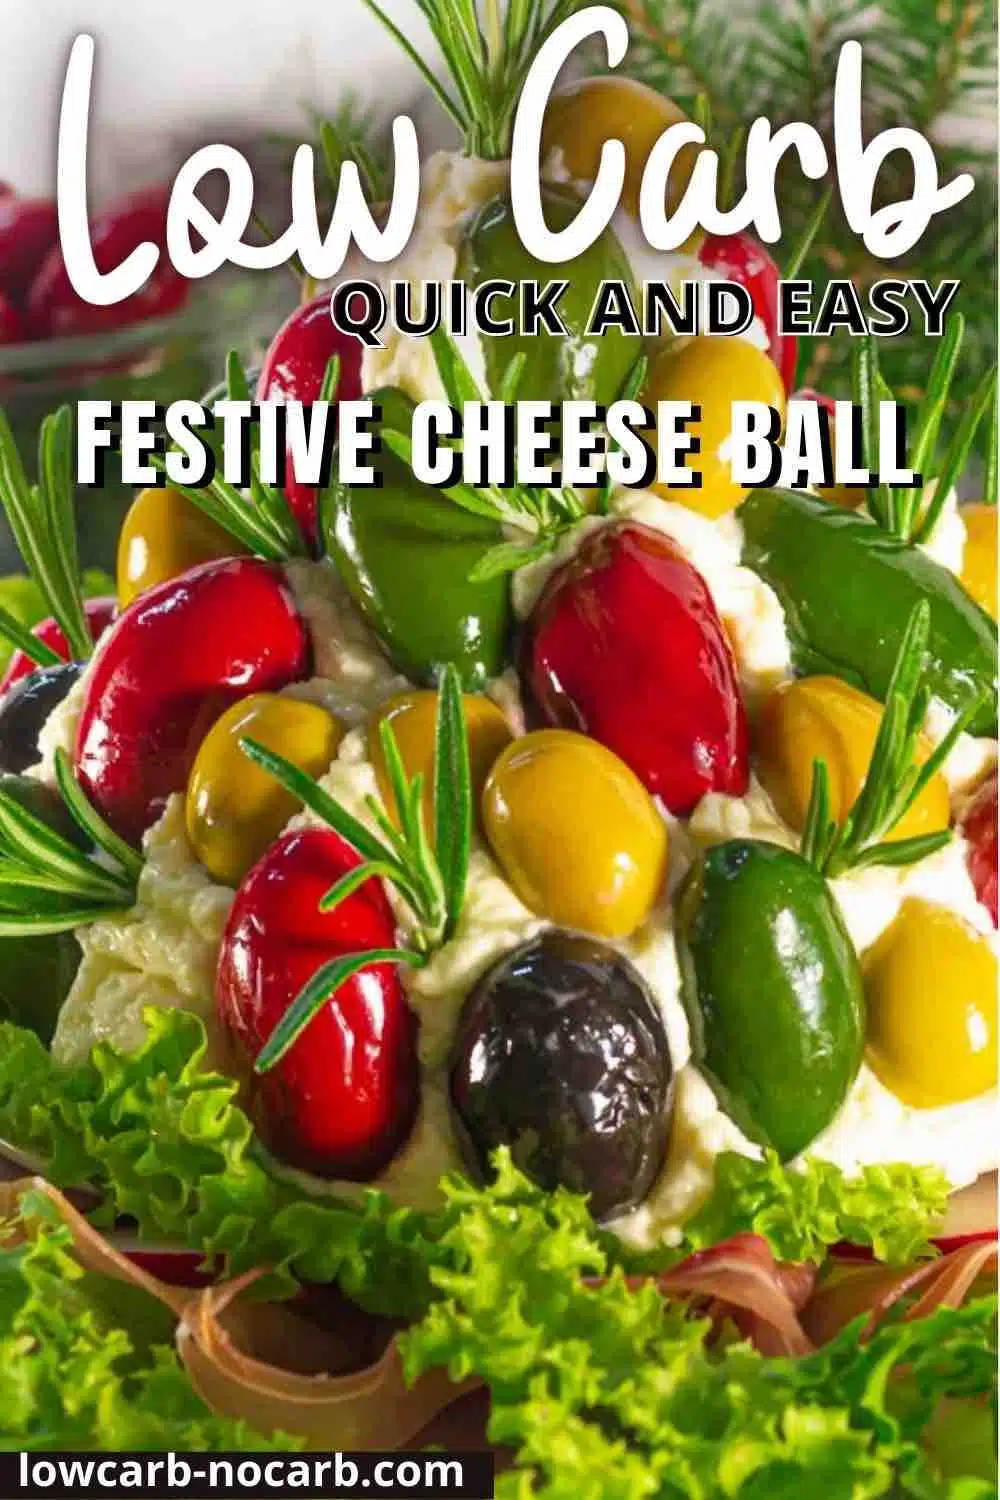 Christmas antipasto cheese tree ball with olives and salad.